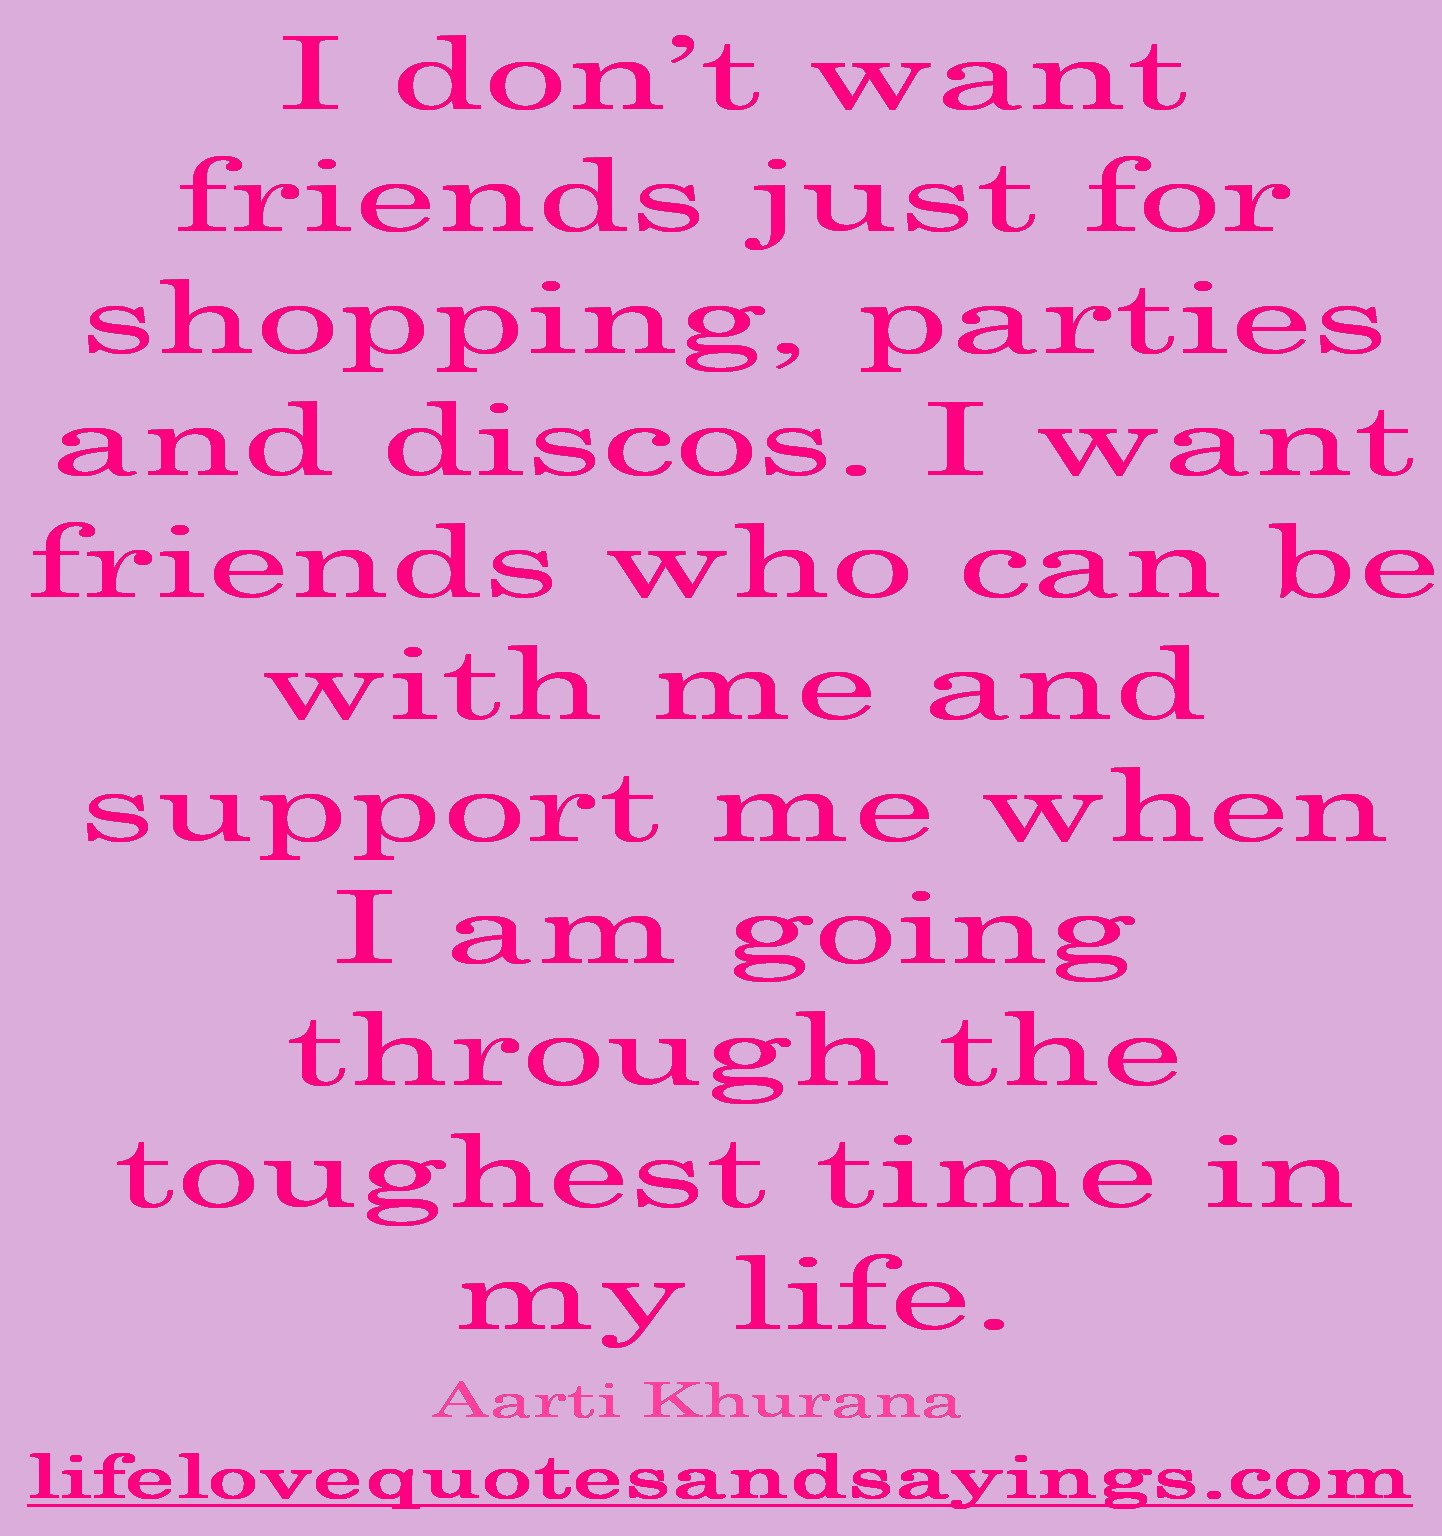 Quotes About Friendship And Support. QuotesGram